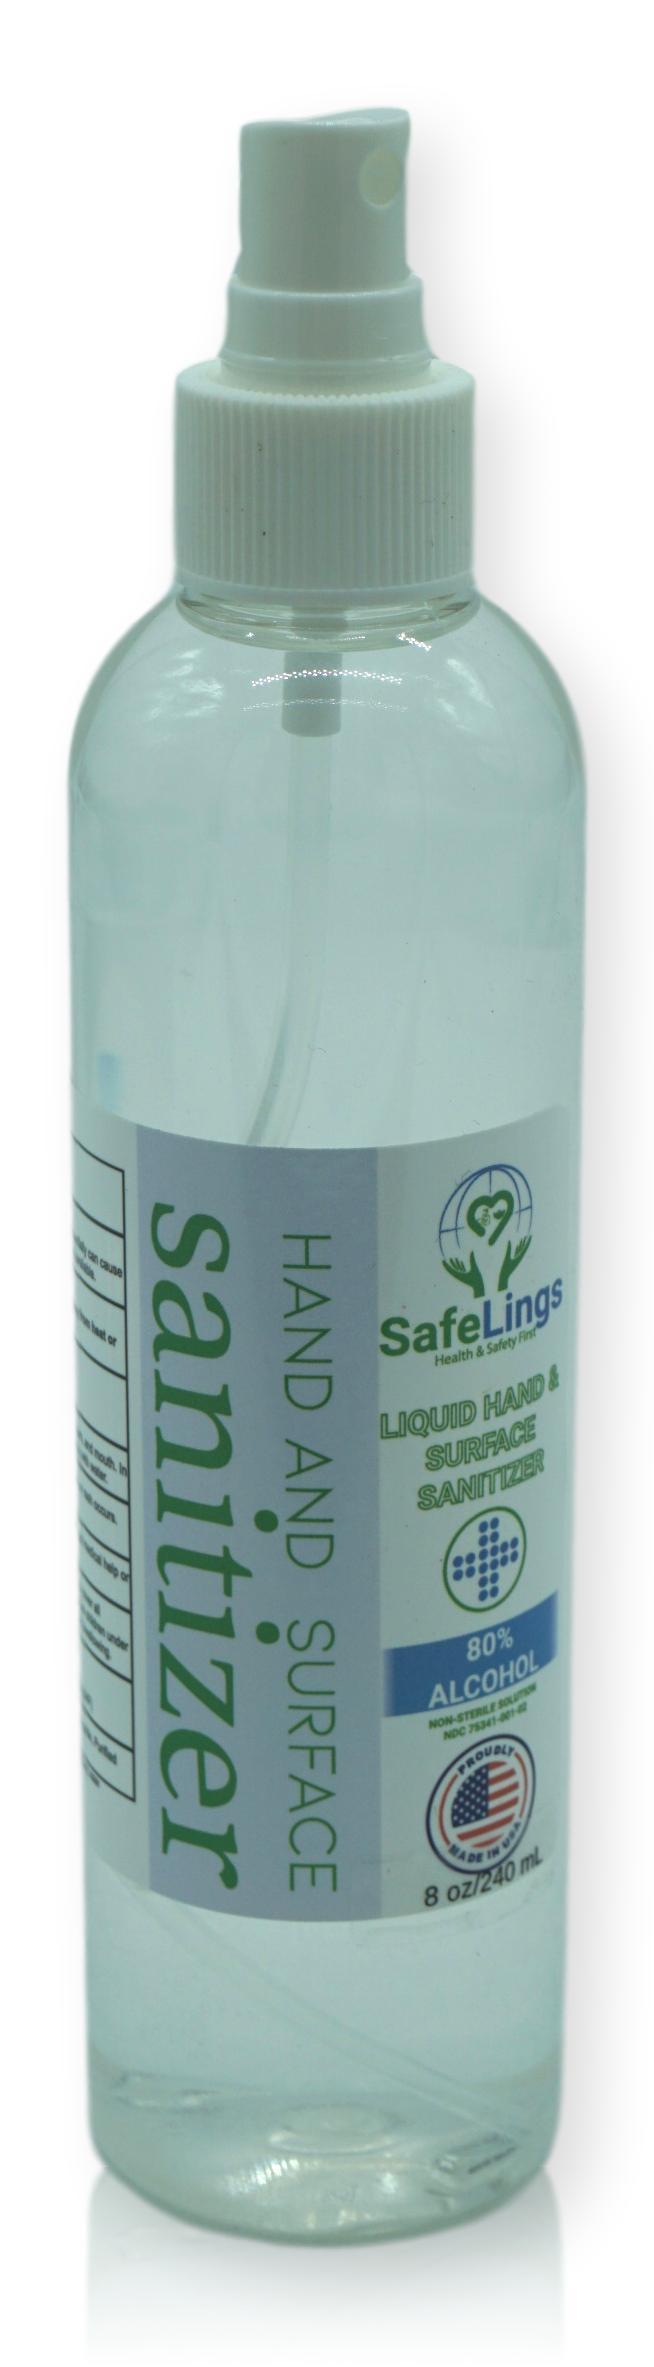 Liquid Hand Sanitizer & All-Surface Disinfectant 4 OZ